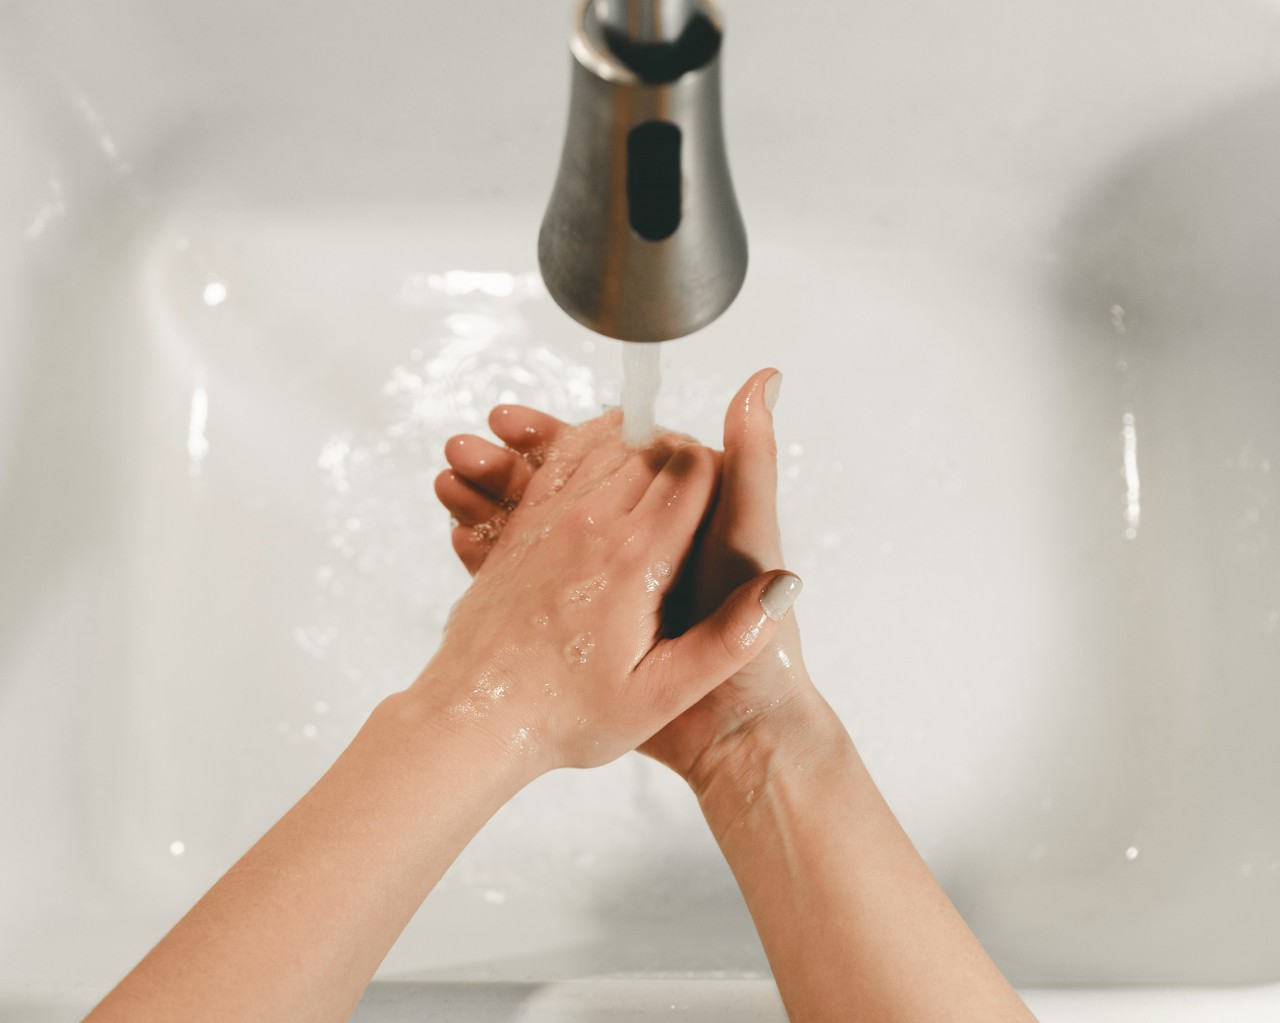 Person washing hands to prevent spread of germs